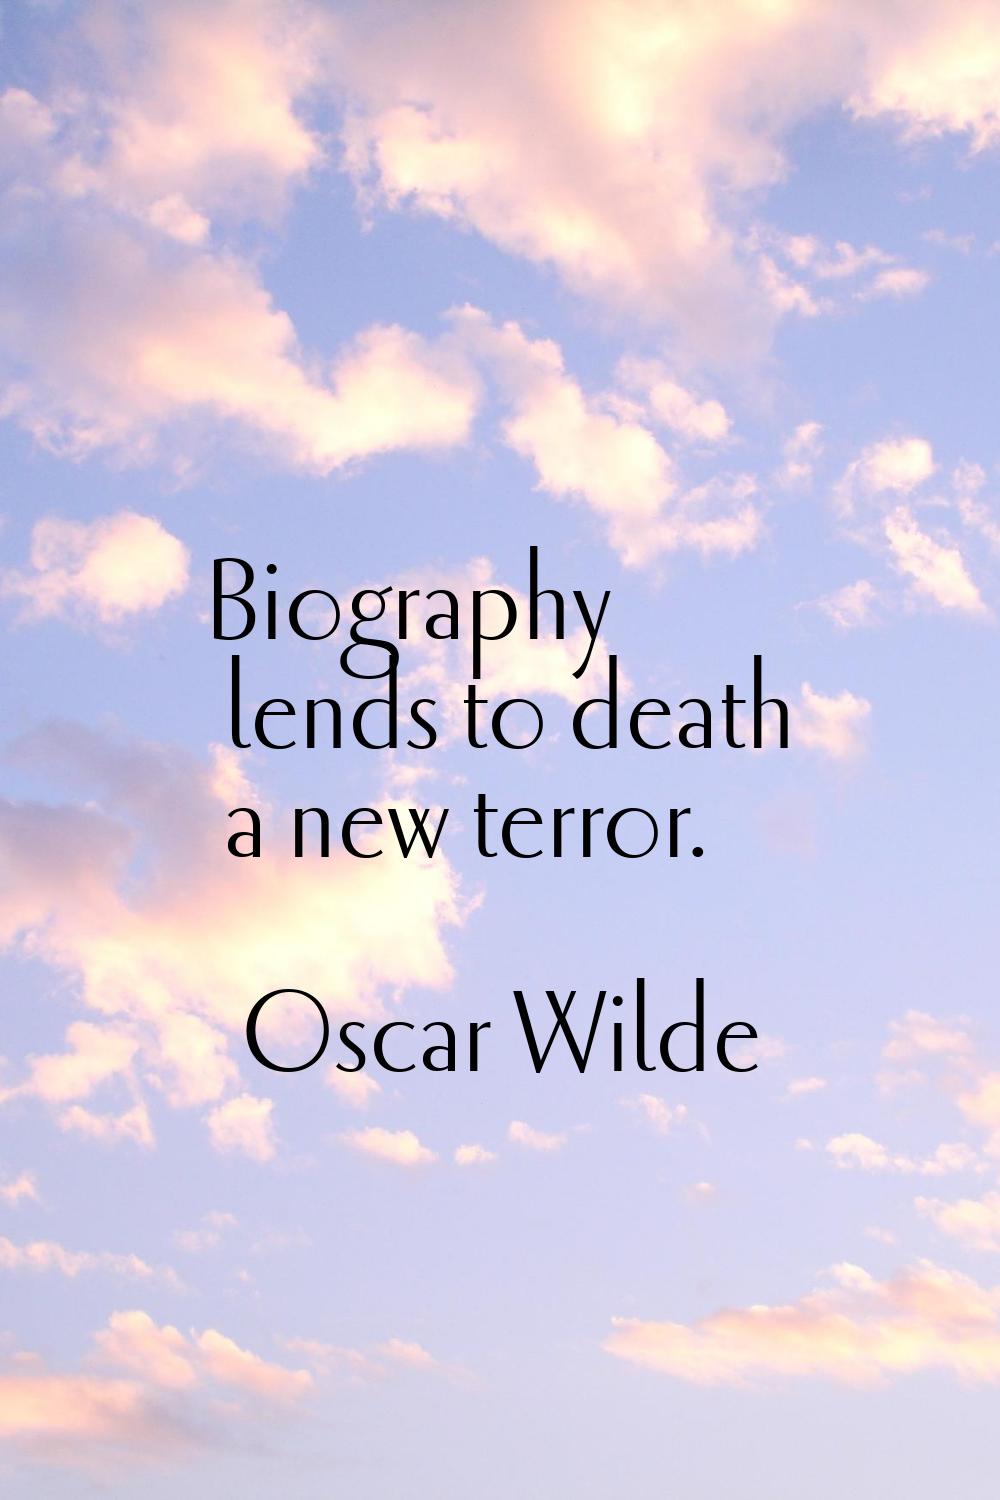 Biography lends to death a new terror.